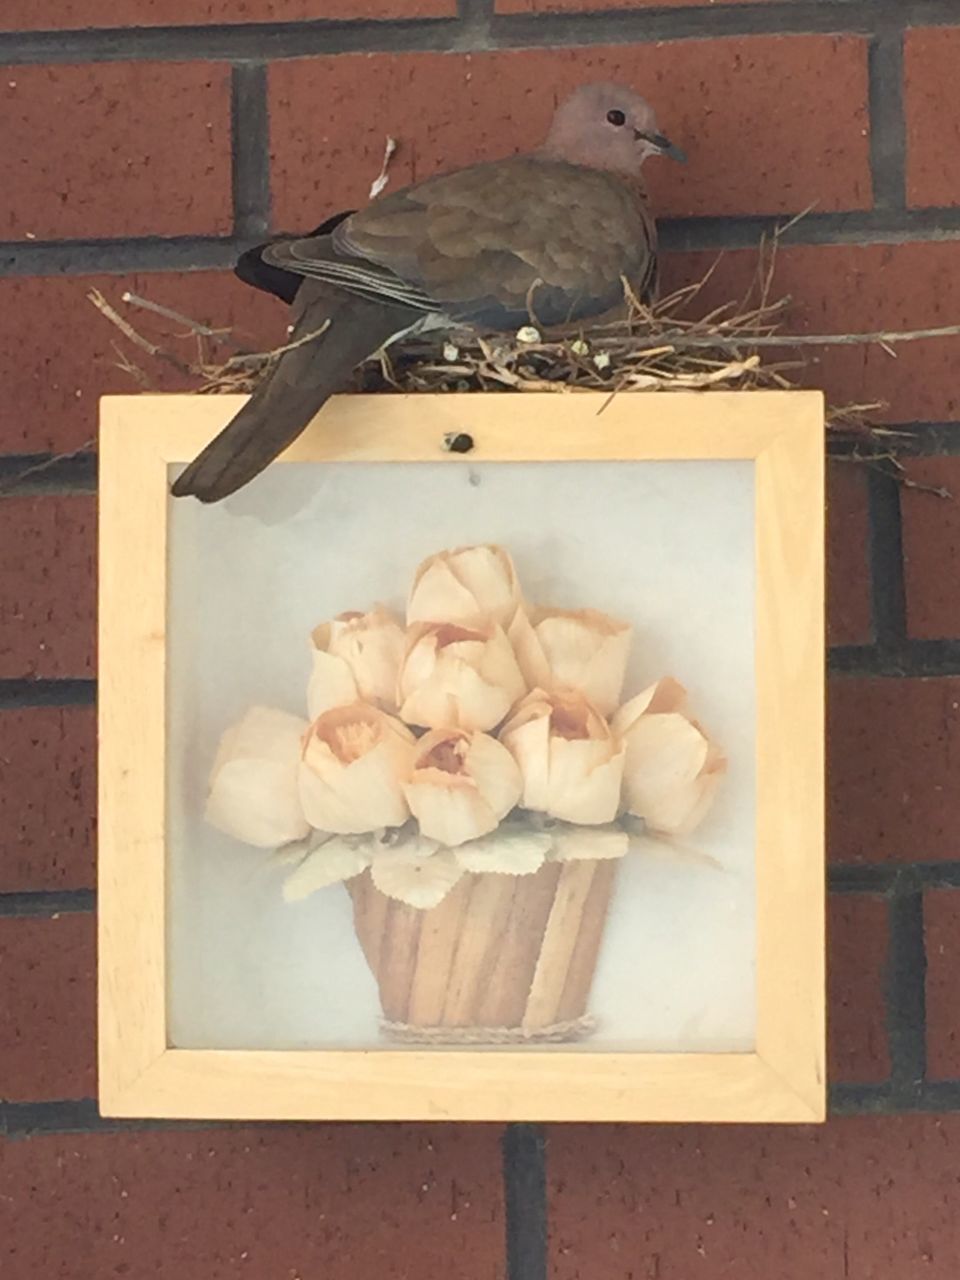 HIGH ANGLE VIEW OF BIRD IN CONTAINER ON BRICK WALL